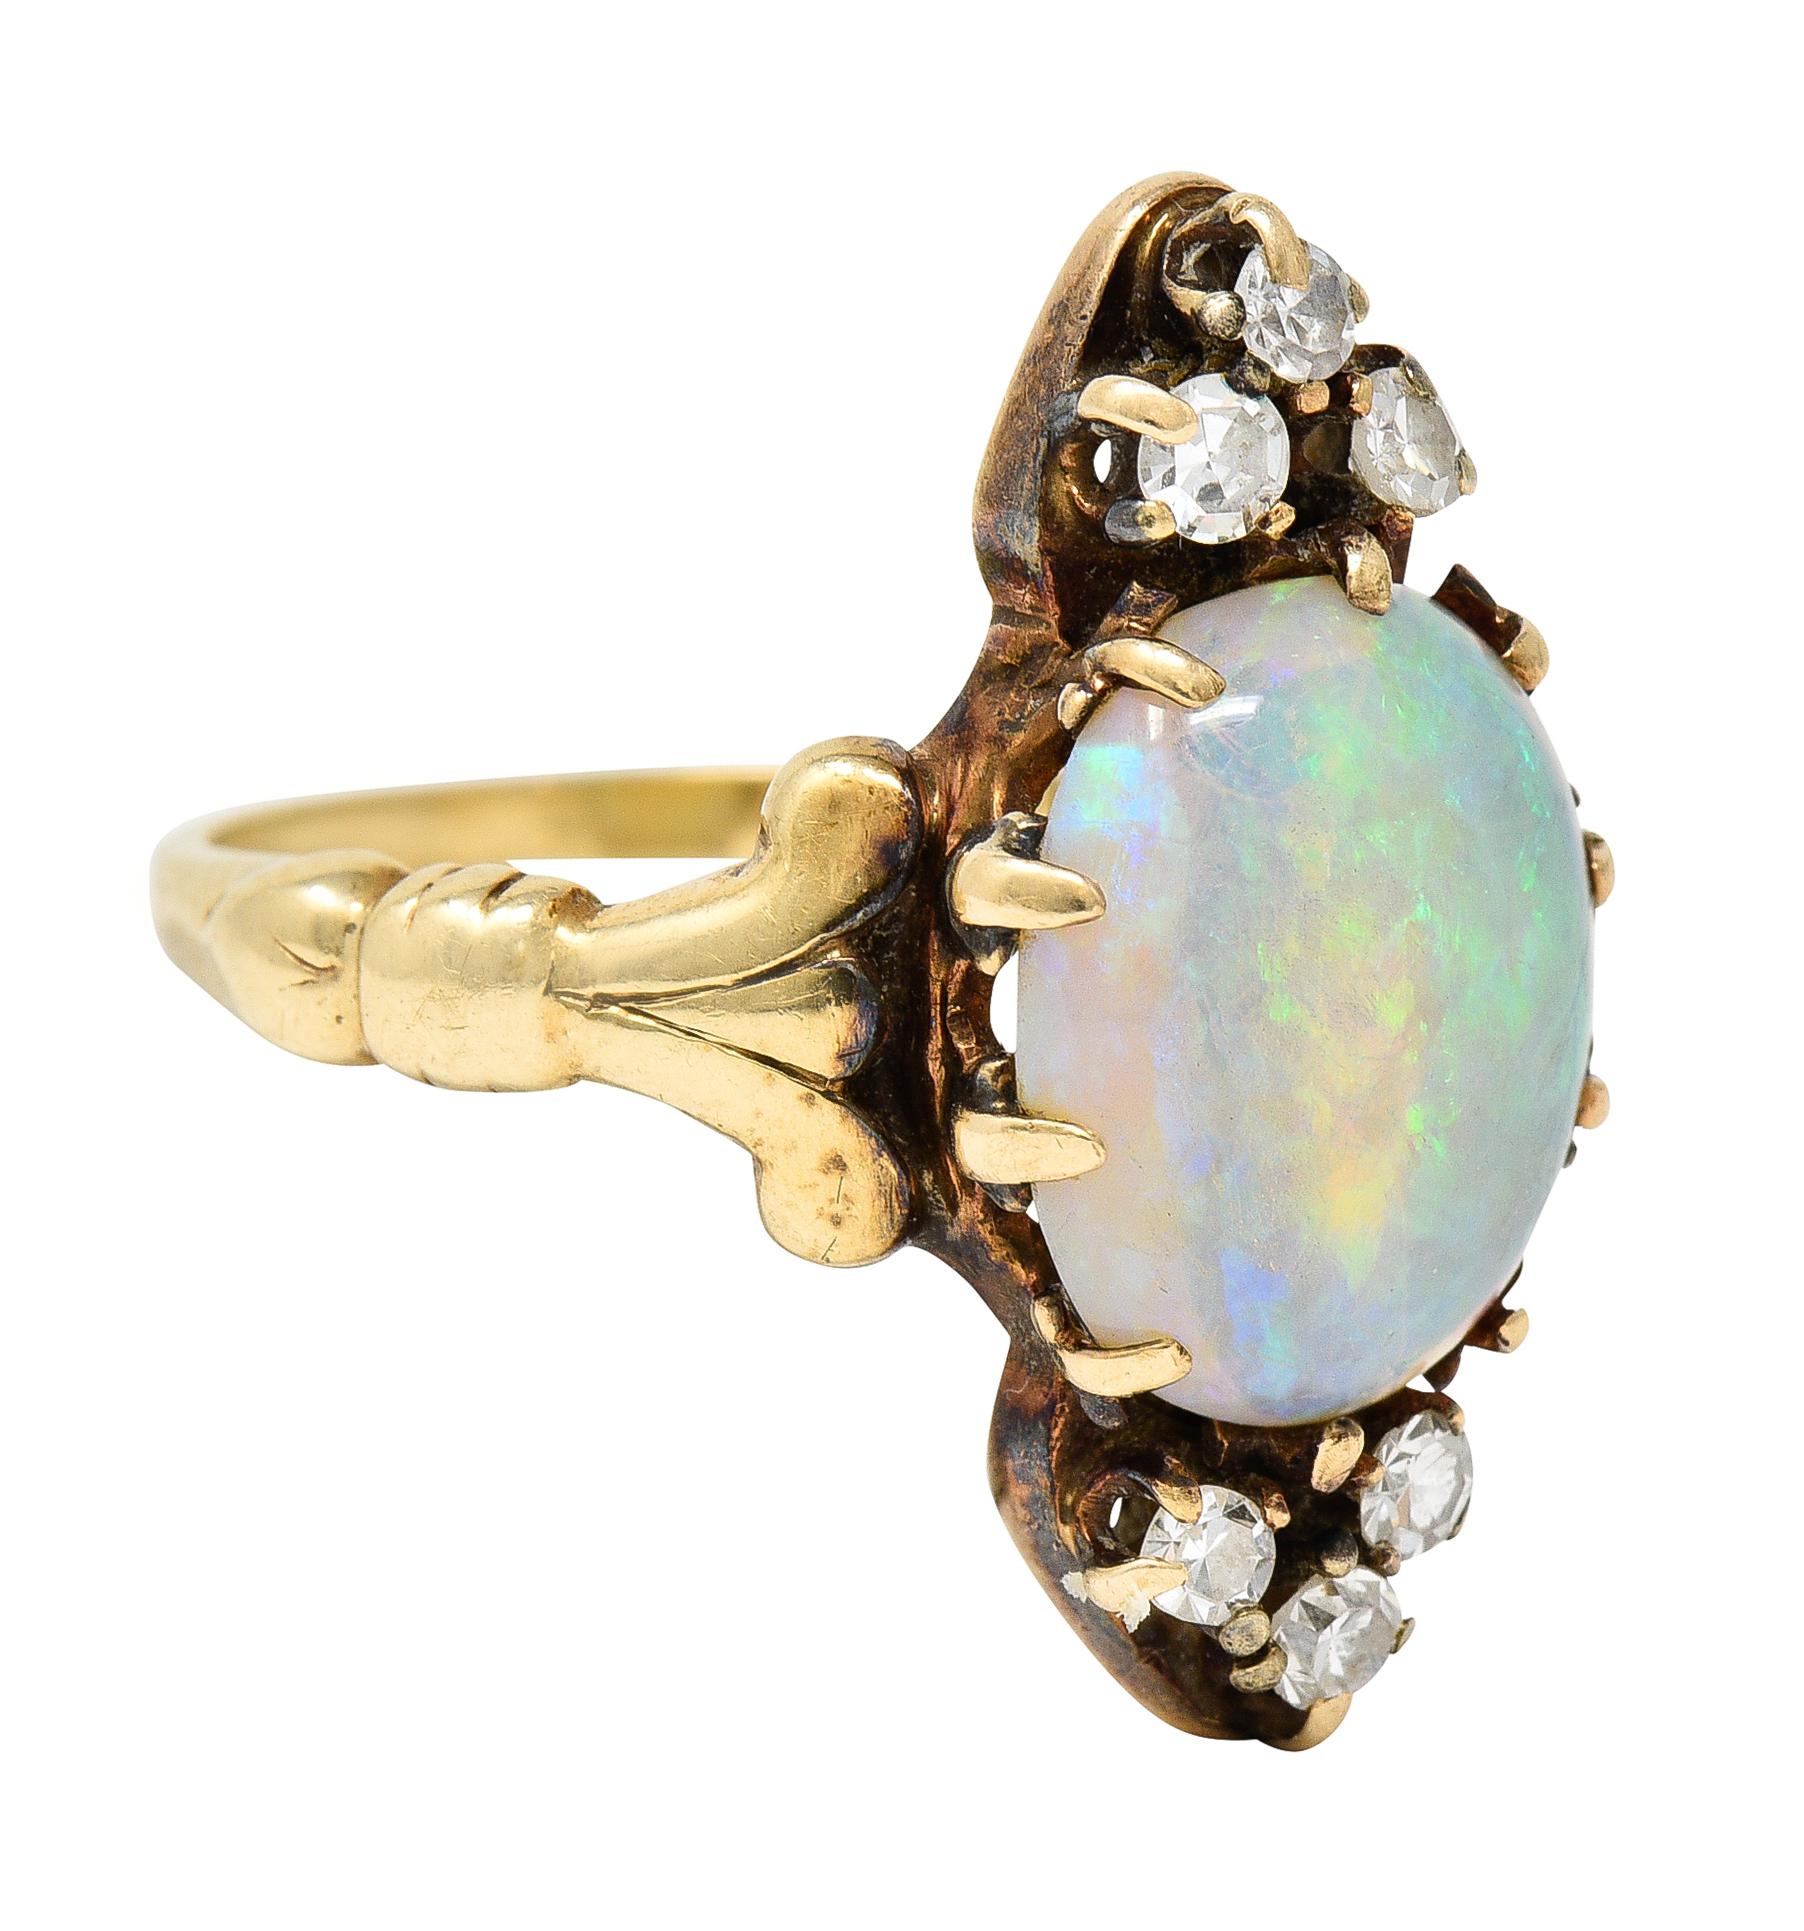 Ring centers a 10.0 x 11.5 mm oval cabochon opal - white in body color with spectral play-of-color

Set with stylized trefoil prongs and flanked North to South by six single cut diamonds

Prong set and weighing approximately 0.18 carat total - eye